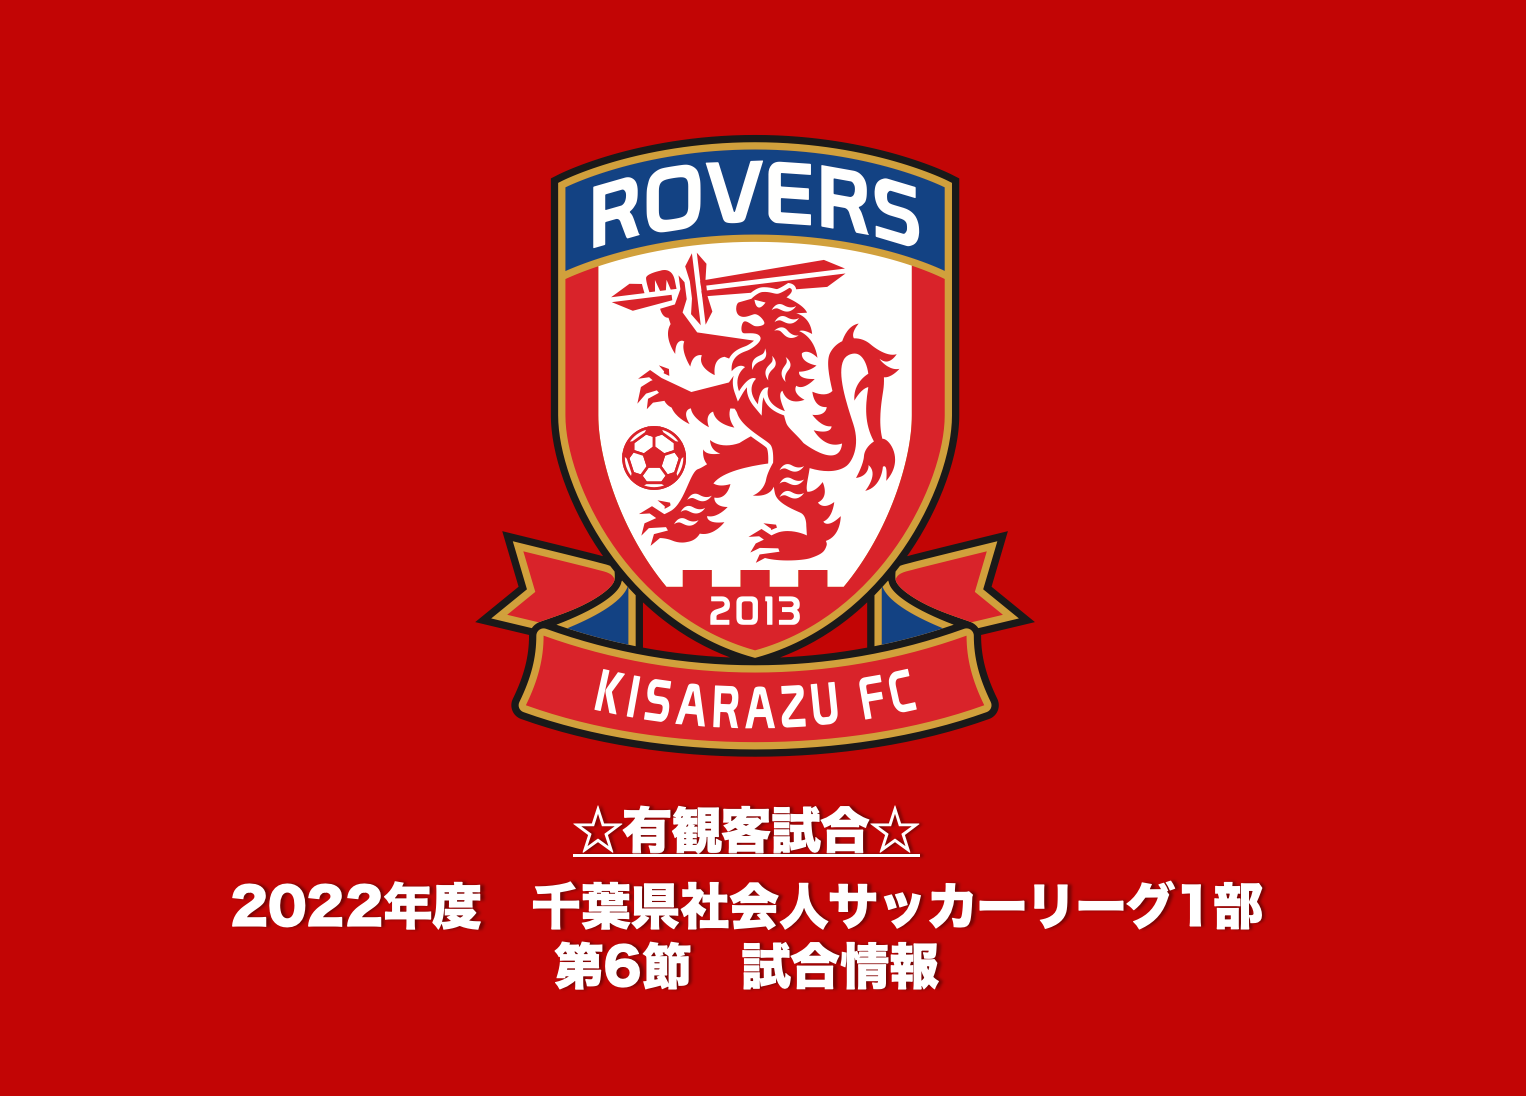 You are currently viewing ☆有観客開催☆【試合情報】2022年度 千葉県社会人サッカーリーグ1部 第6節について（7/10）